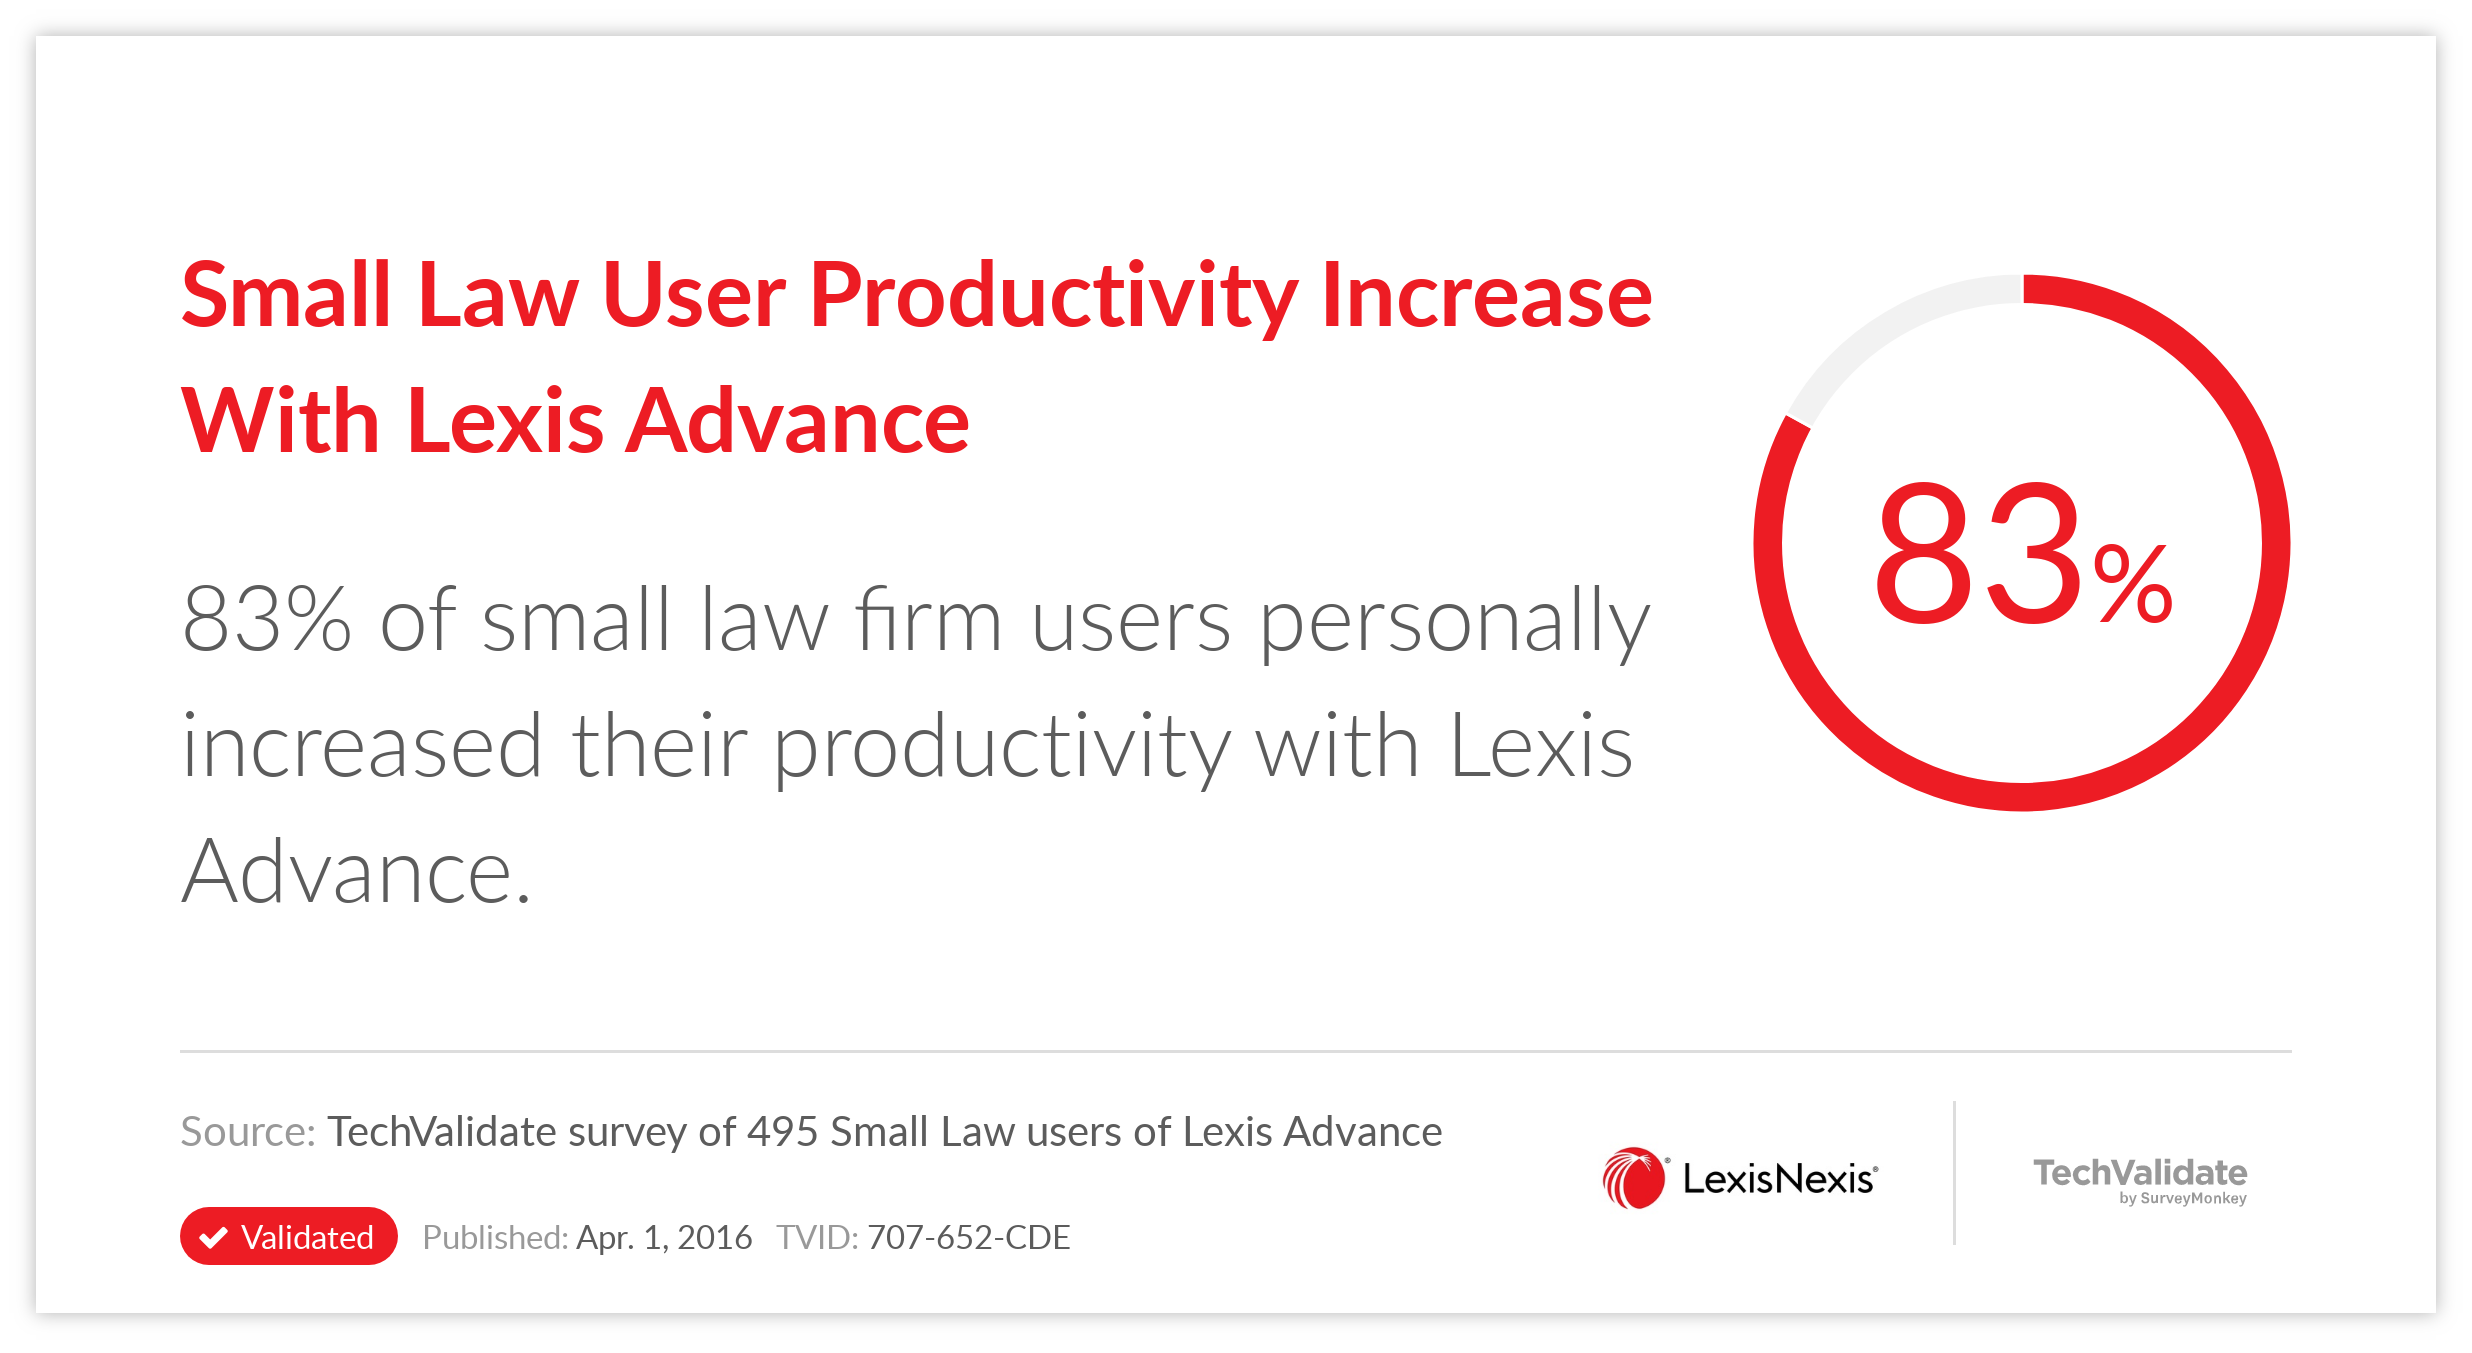 Small Law User Productivity Increase With Lexis Advance